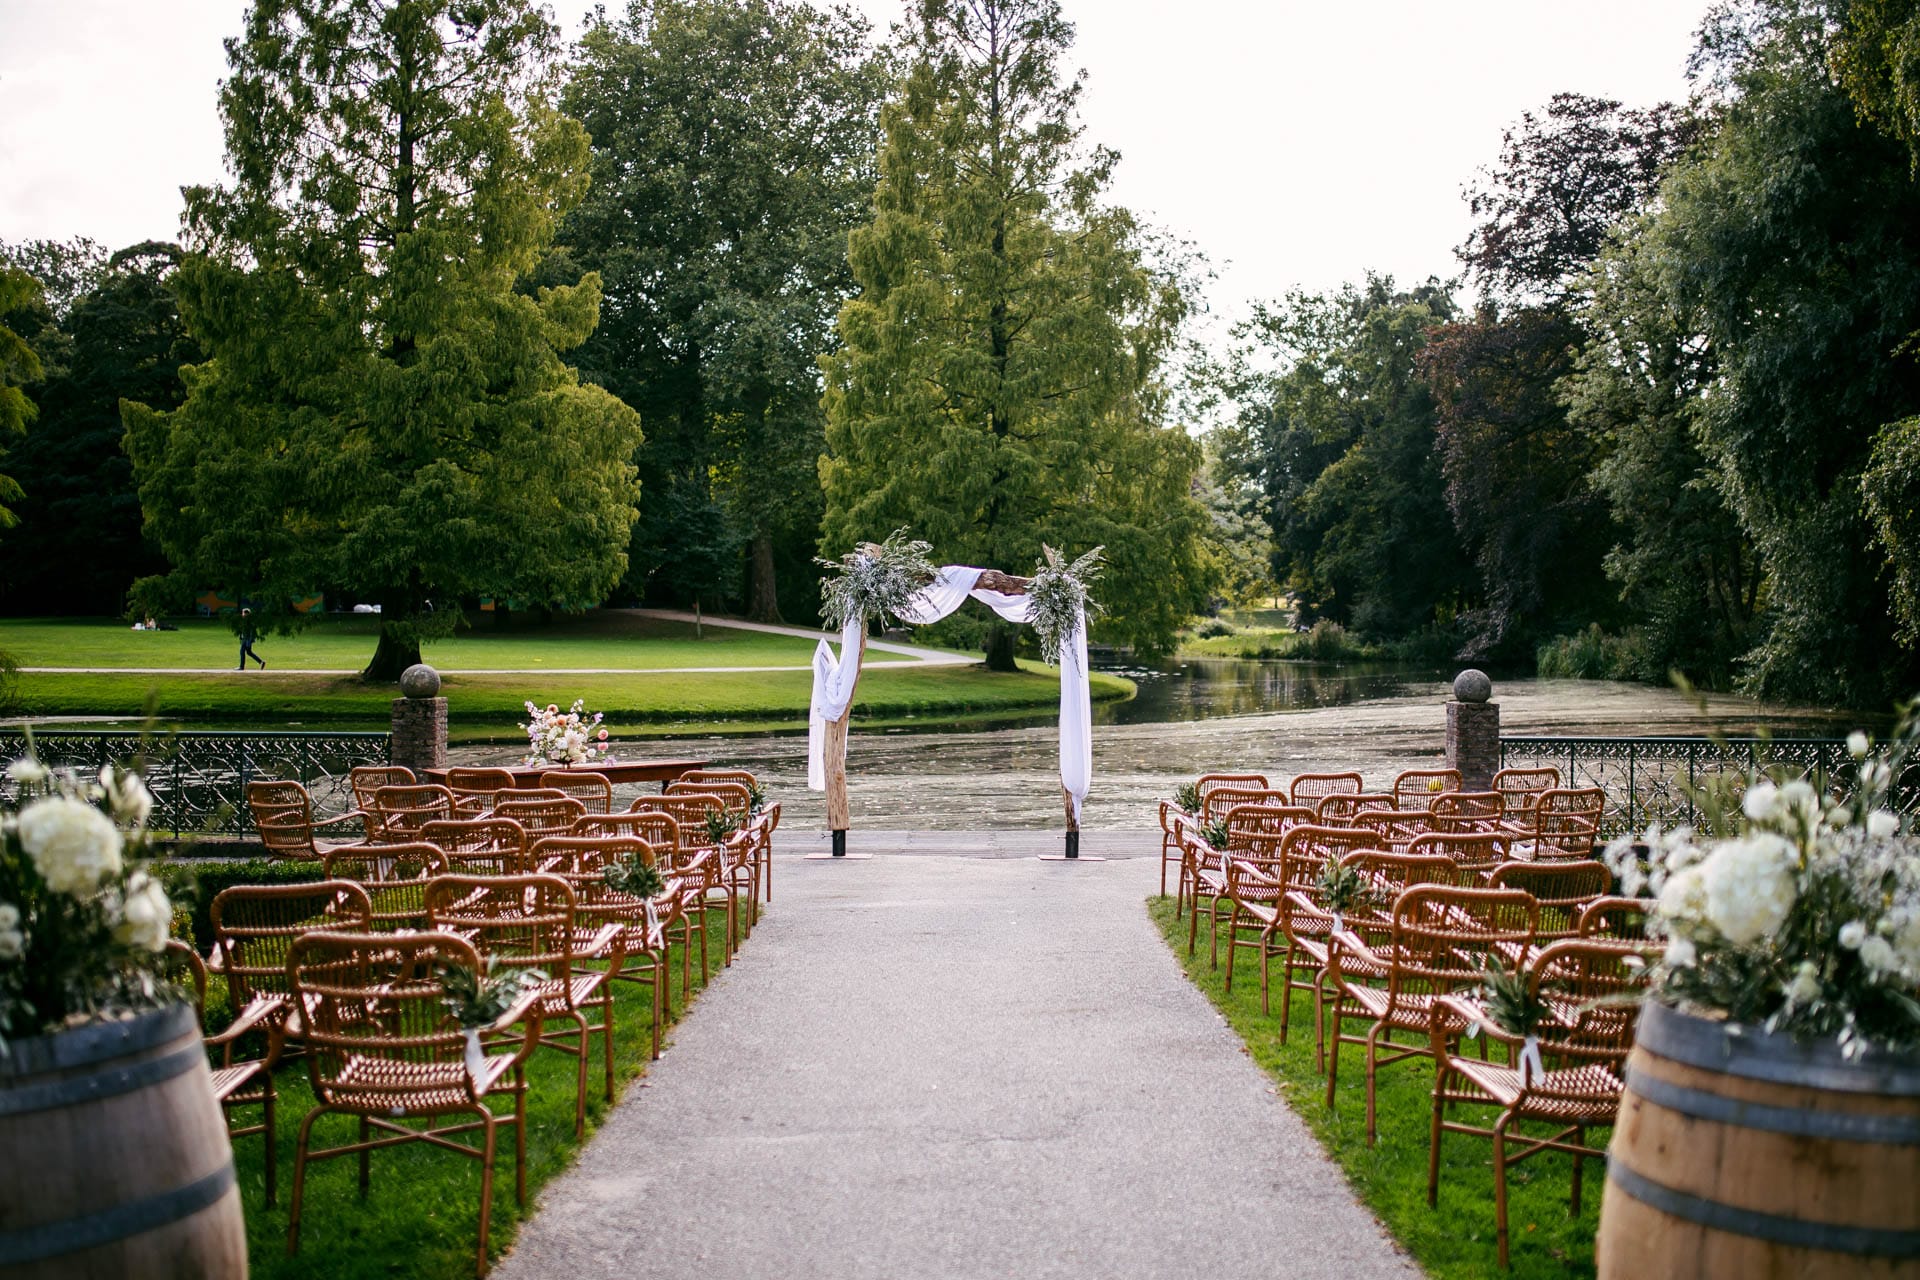 Description: A Wedding in the Woods ceremony set-up with wooden chairs and barrels.